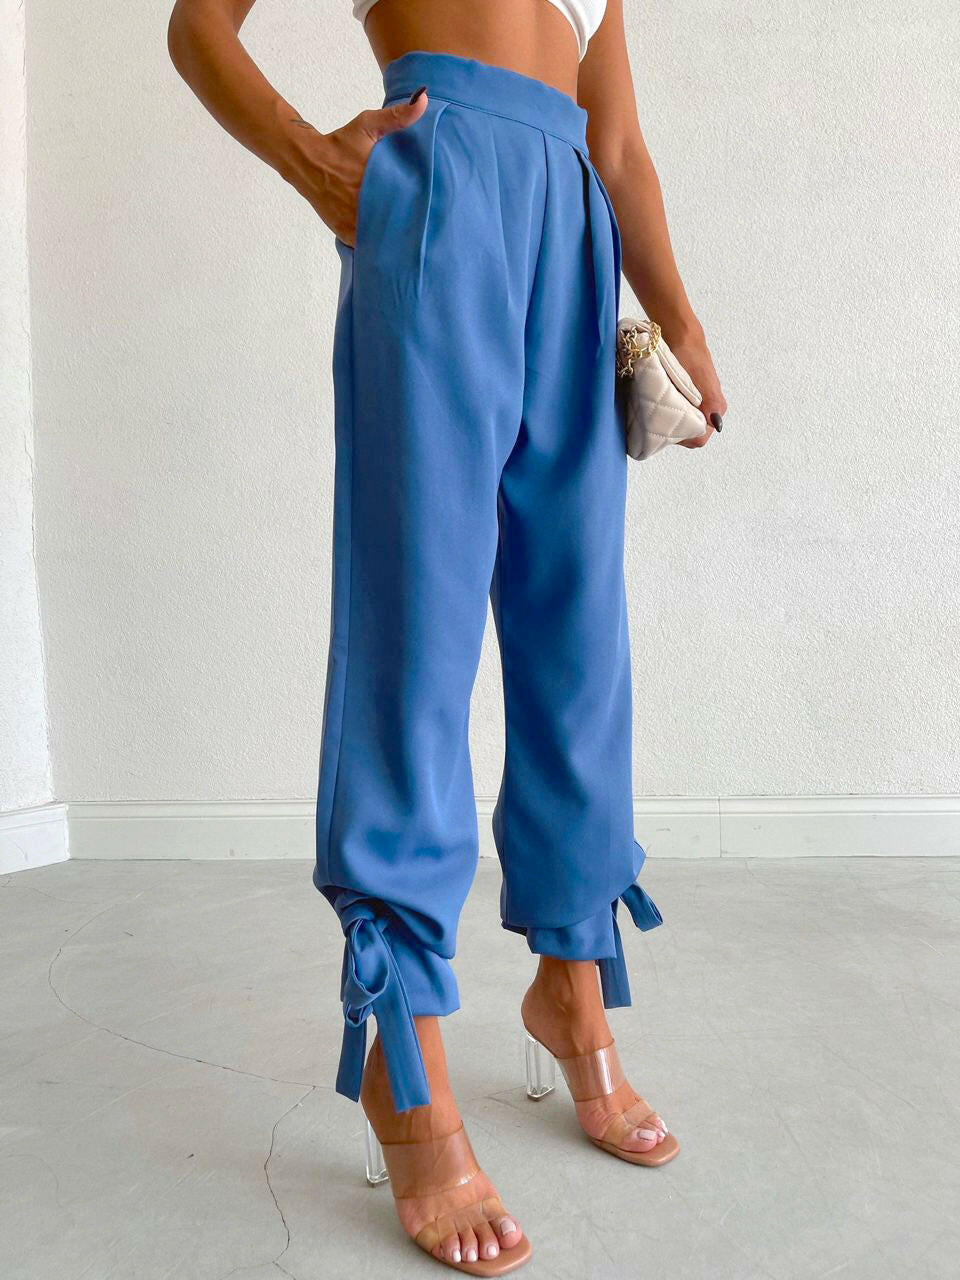 Ankle Tie High Waisted Trousers in Saxe Blue - Noxlook.